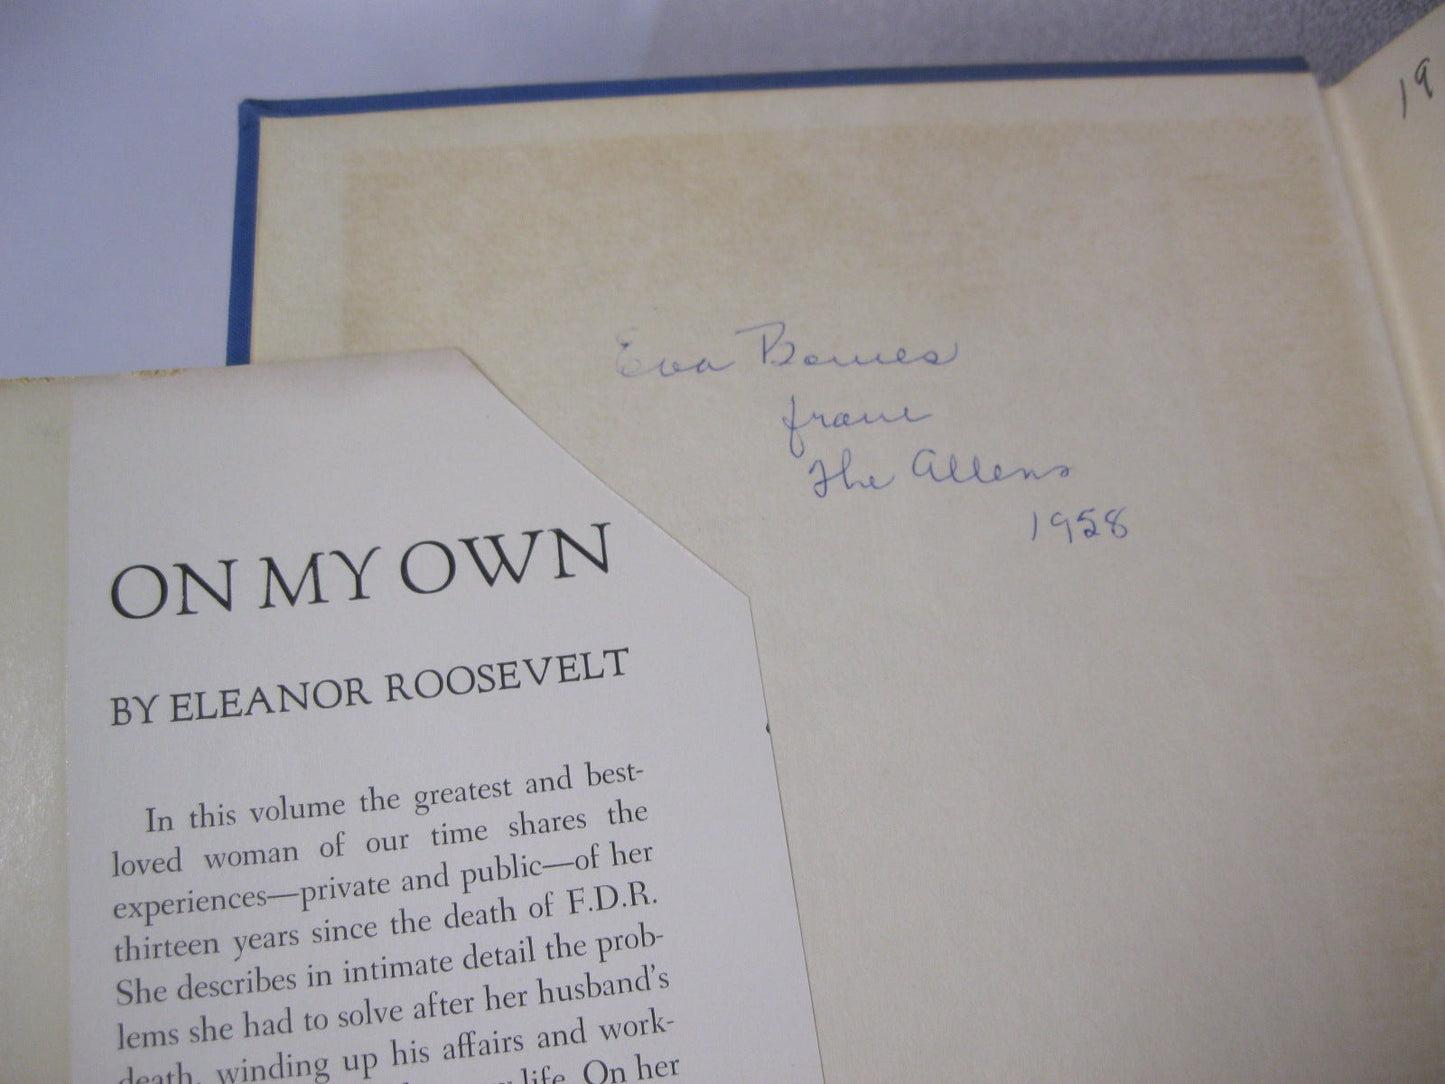 On My Own by Eleanor Roosevelt